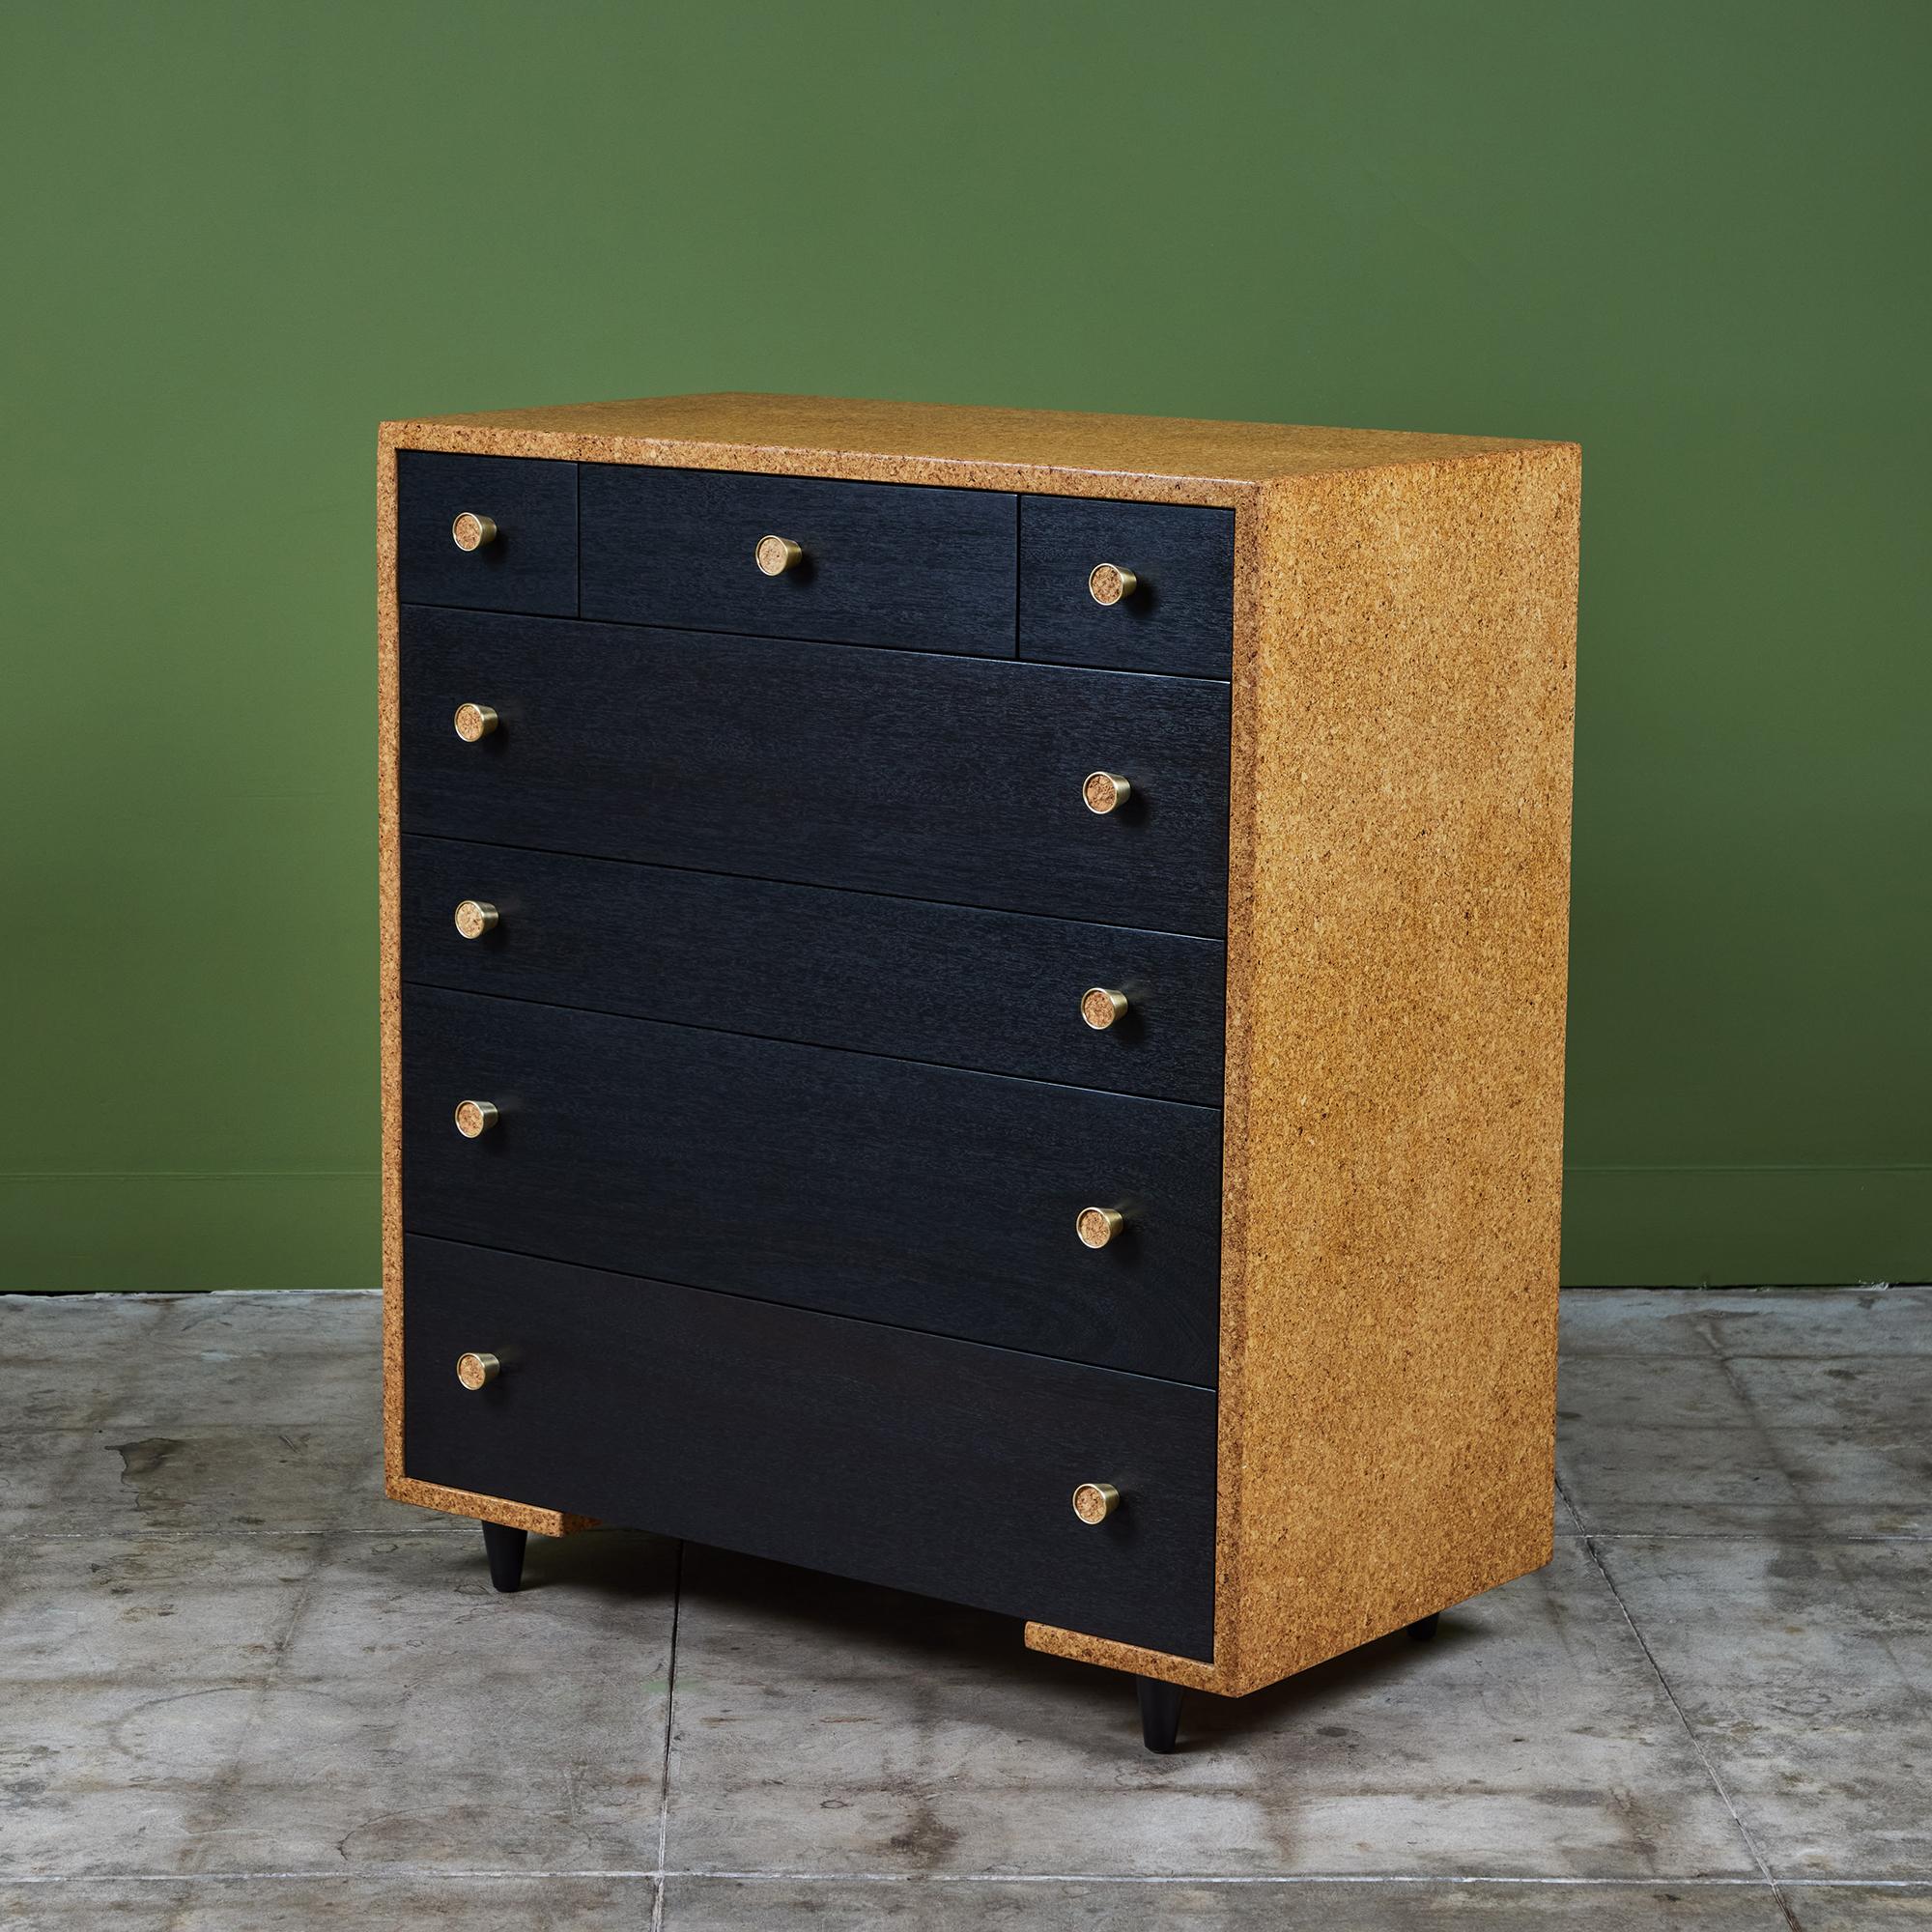 Paul Frankl’s cork furniture pieces are among his longest-lasting contributions to American modernism and are highly sought after to this day. This example, a cork top waterfall edge highboy dresser designed for and produced by Johnson Furniture Co